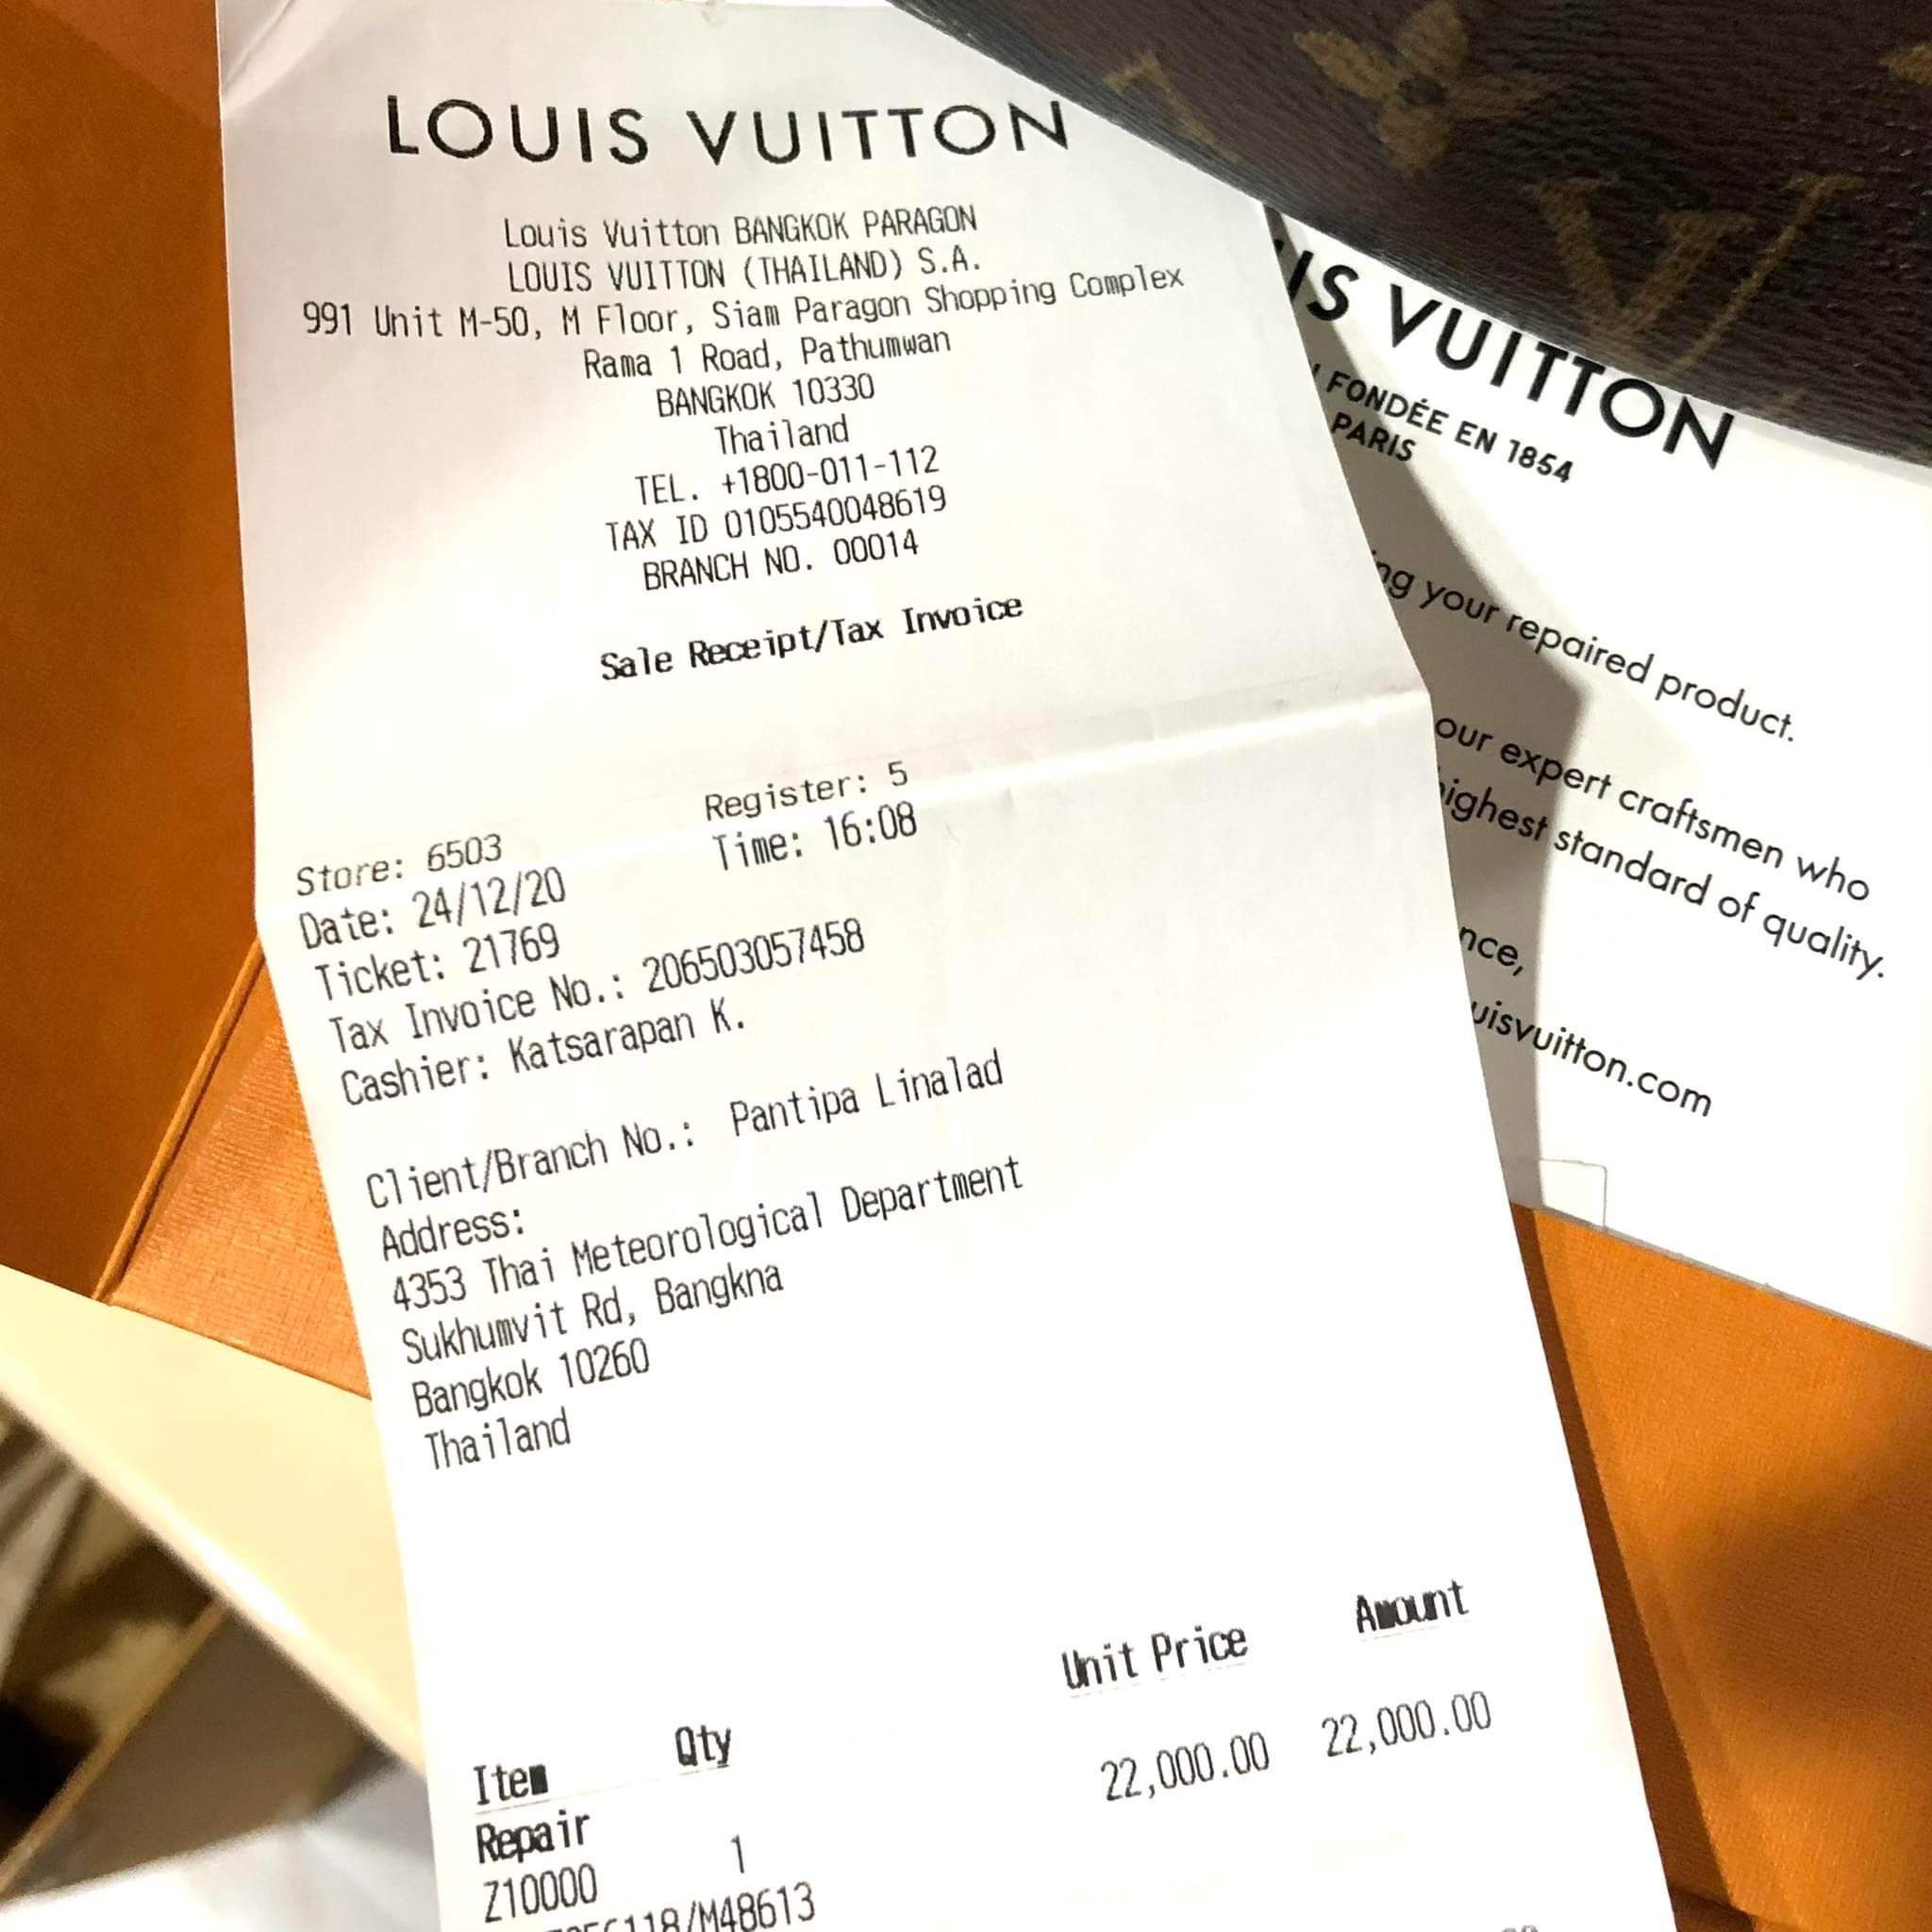 Louis Vuitton Neverfull Bags for sale in Bangkok, Thailand